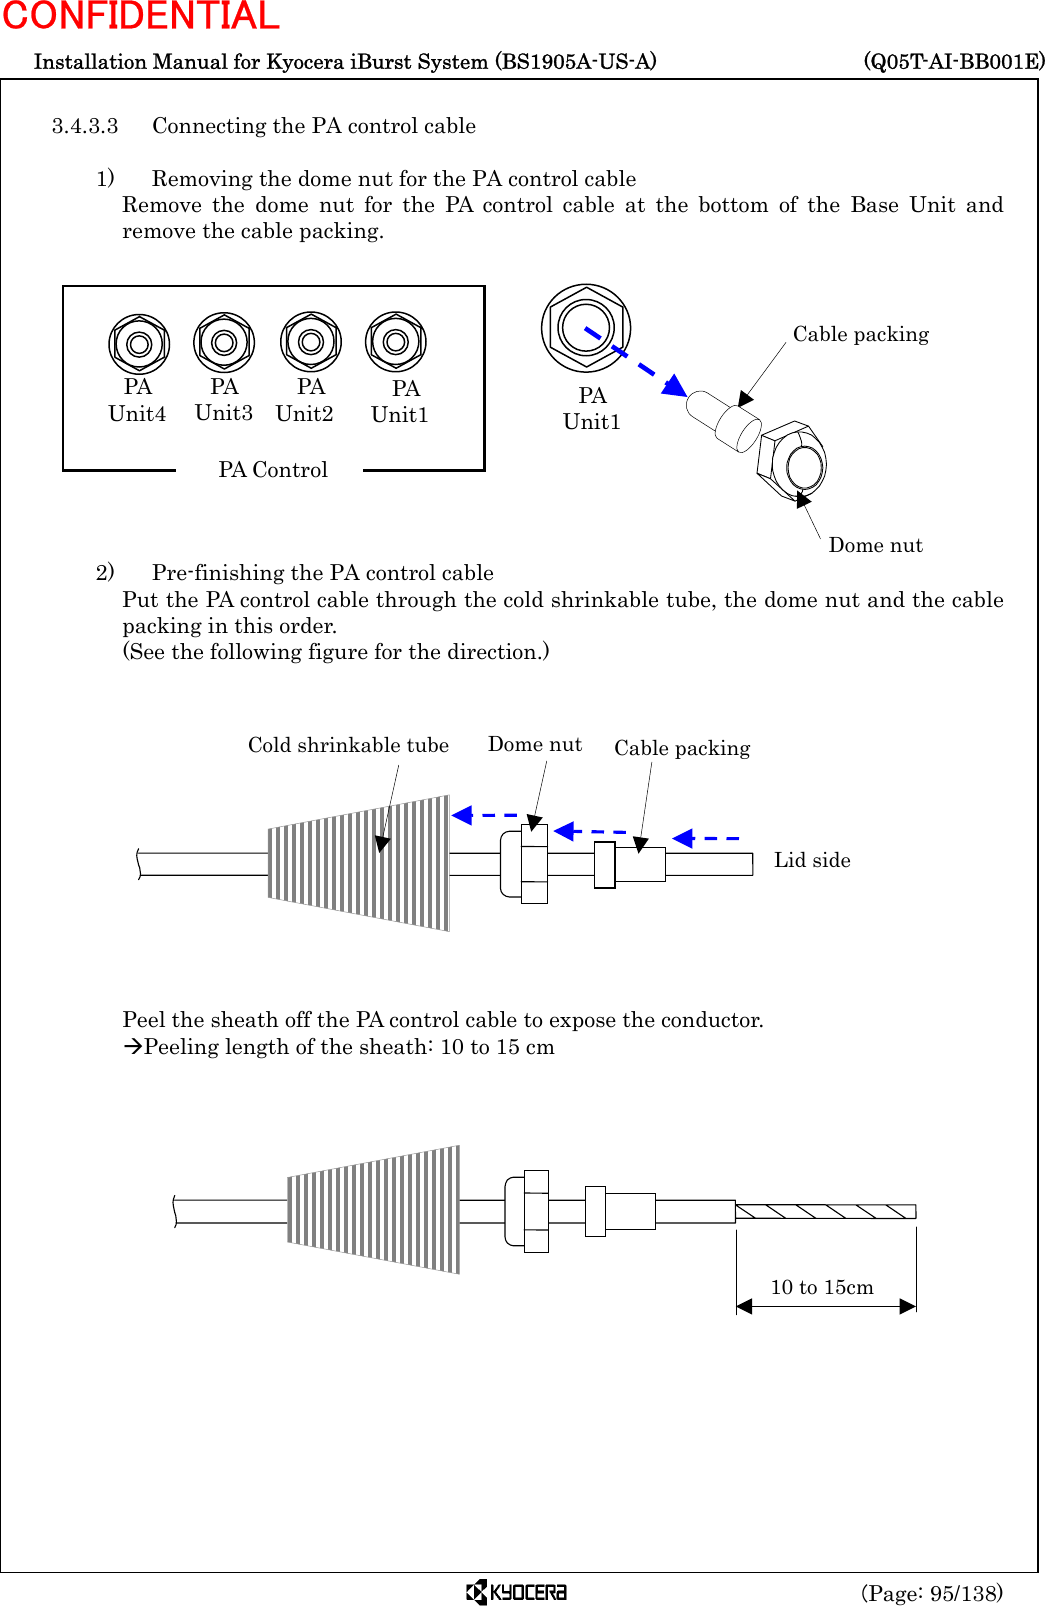  Installation Manual for Kyocera iBurst System (BS1905A-US-A)     (Q05T-AI-BB001E) (Page: 95/138) CONFIDENTIAL  3.4.3.3  Connecting the PA control cable    1)    Removing the dome nut for the PA control cable Remove the dome nut for the PA control cable at the bottom of the Base Unit and remove the cable packing.             2)    Pre-finishing the PA control cable Put the PA control cable through the cold shrinkable tube, the dome nut and the cable packing in this order.   (See the following figure for the direction.)              Peel the sheath off the PA control cable to expose the conductor. ÆPeeling length of the sheath: 10 to 15 cm                    Cable packing Dome nut PA  Unit1 Cold shrinkable tube Dome nut  Cable packing Lid side 10 to 15cm PA  Unit4 PA  Unit3 PA  Unit2  PA  Unit1 PA Control 